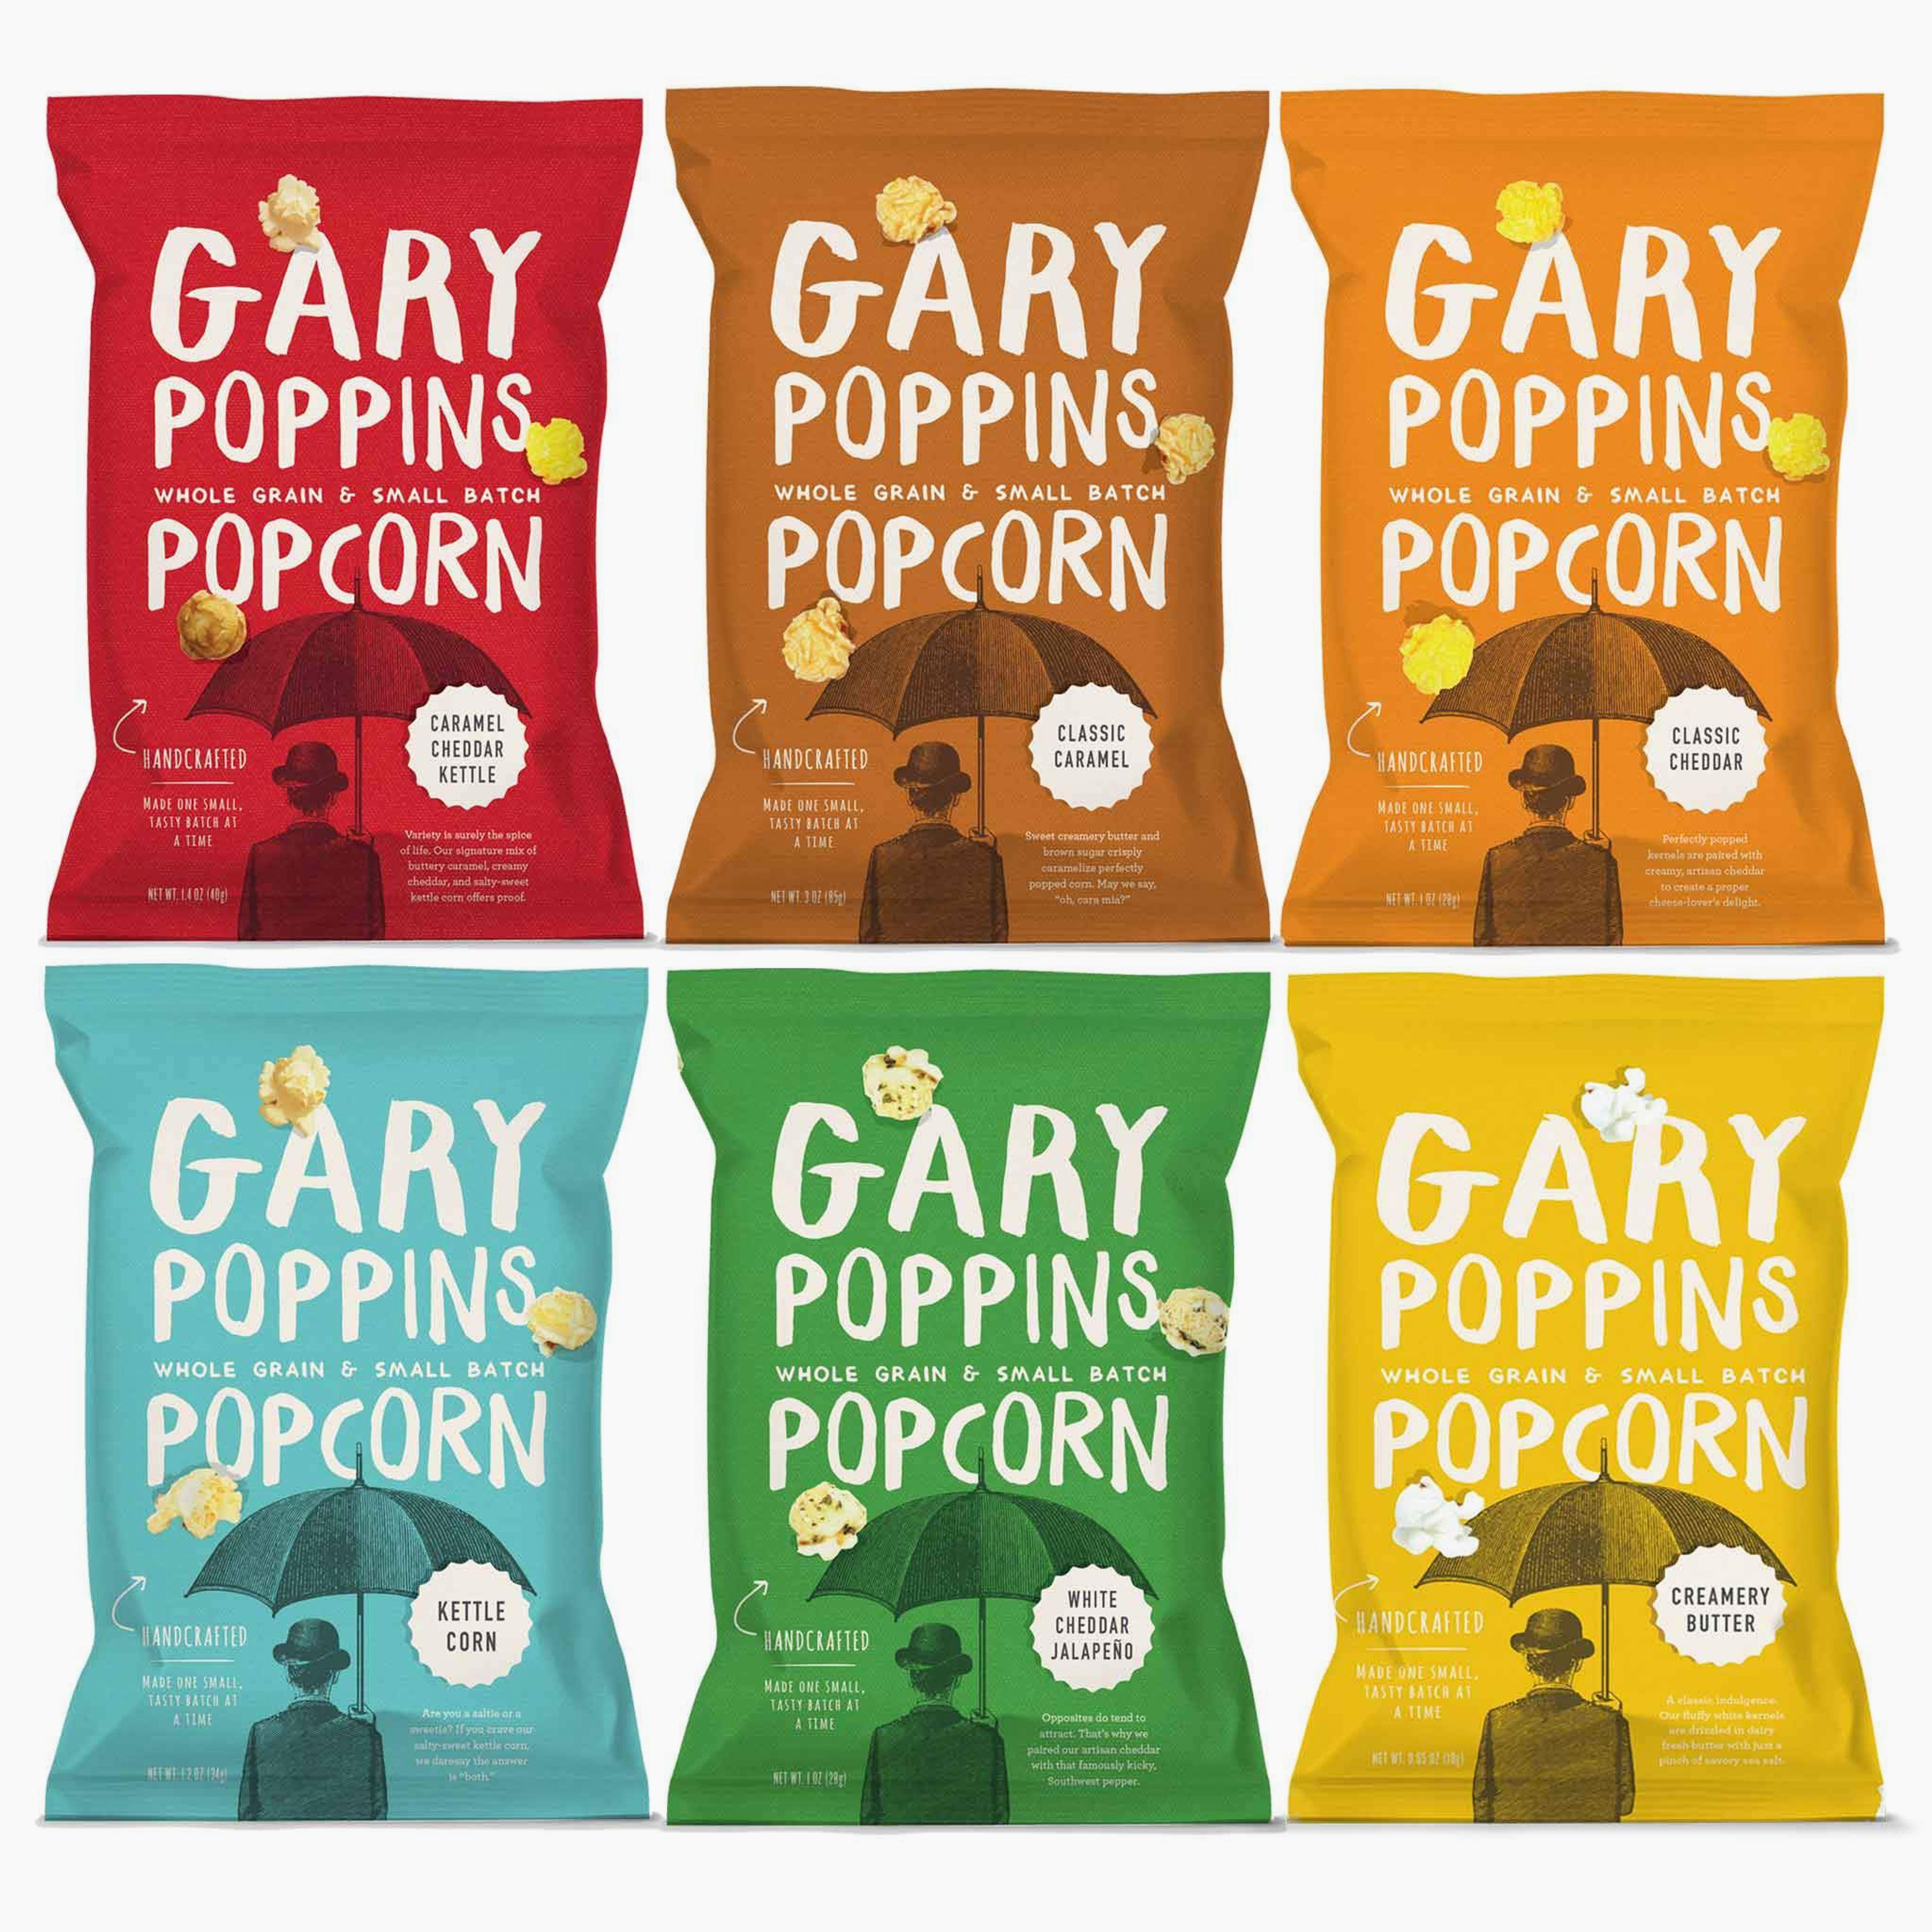 The Best of Gary Poppins Collection